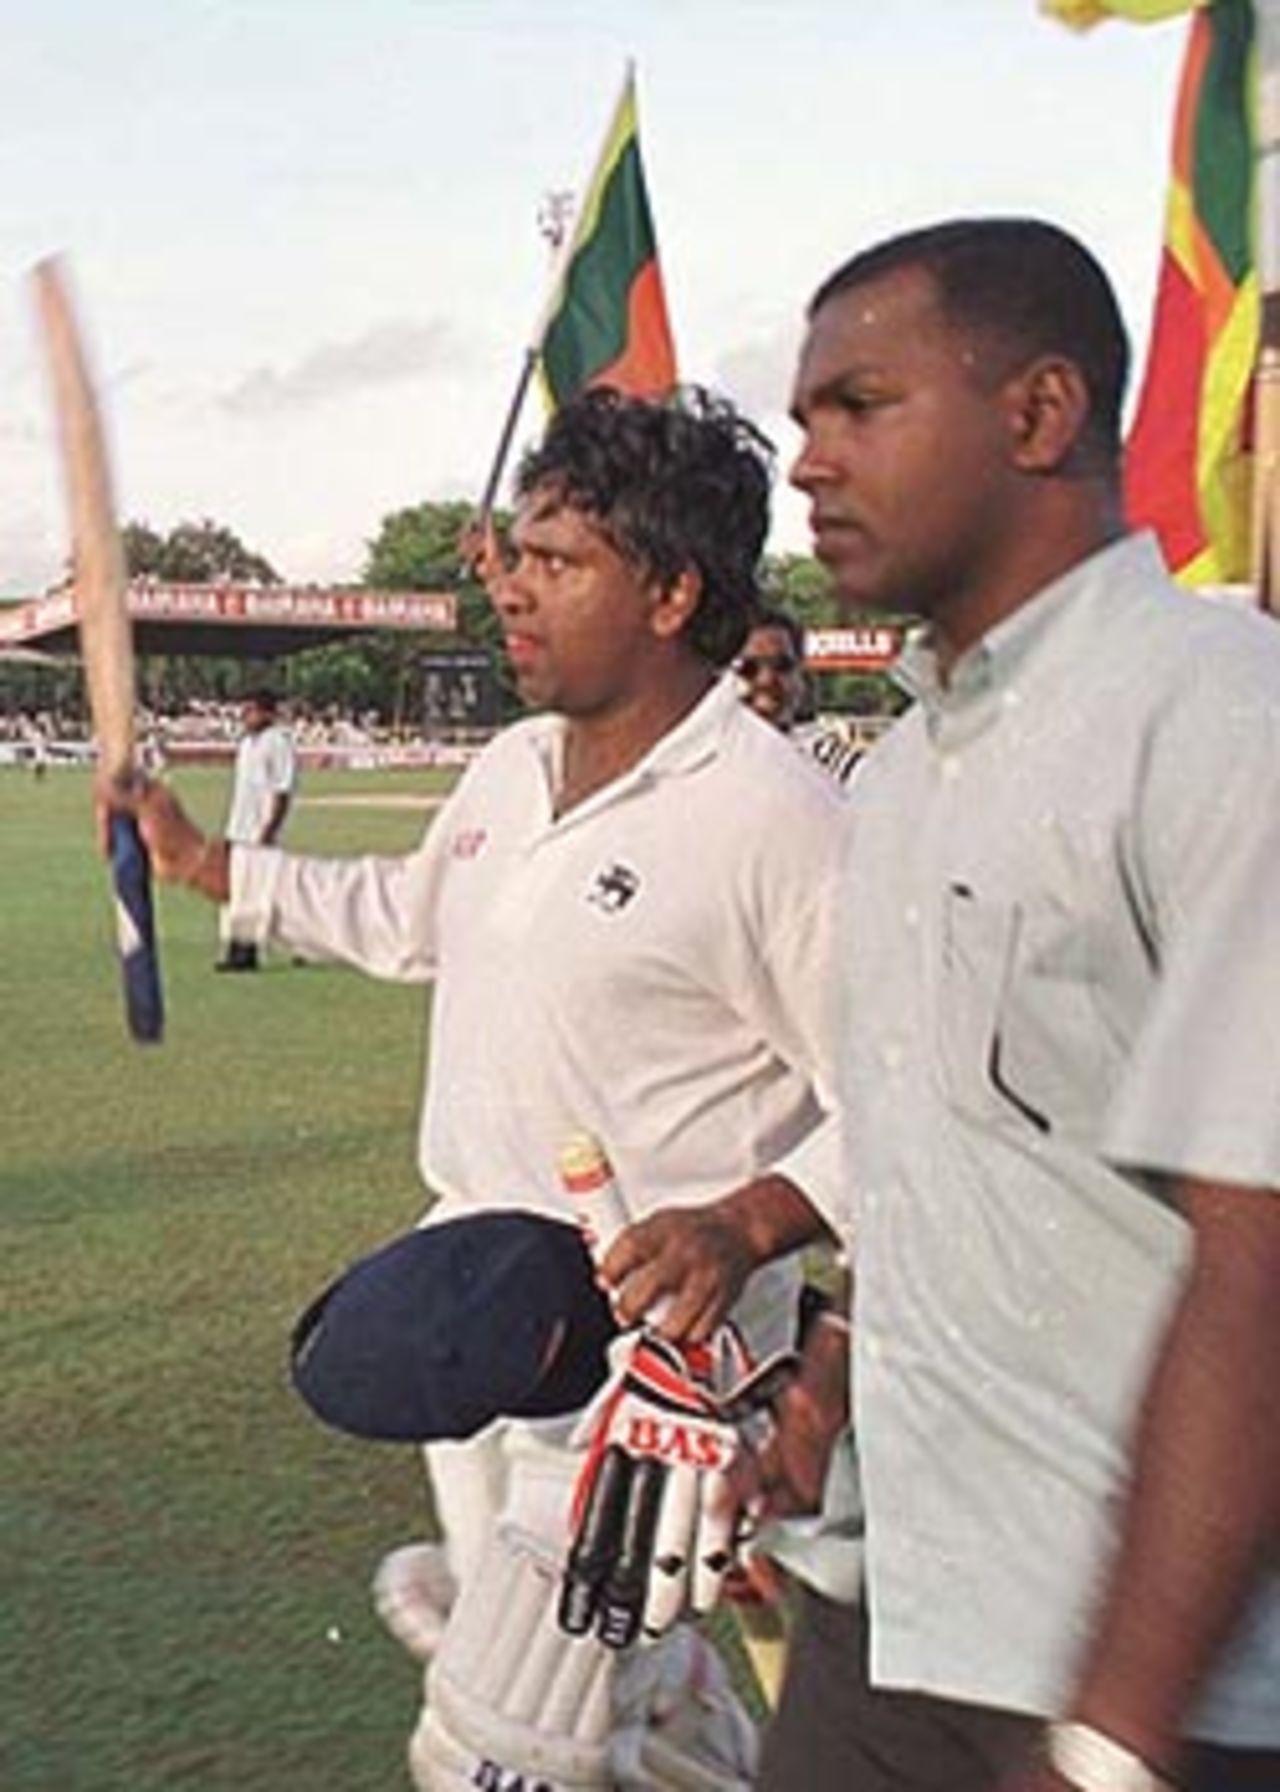 Ranatunga acknowledging the crowd as he trudges back after playing his last innings, South Africa in Sri Lanka, 2000/01, 3rd Test, Sri Lanka v South Africa, Sinhalese Sports Club Ground, Colombo, 06-10 August 2000 (Day 5).